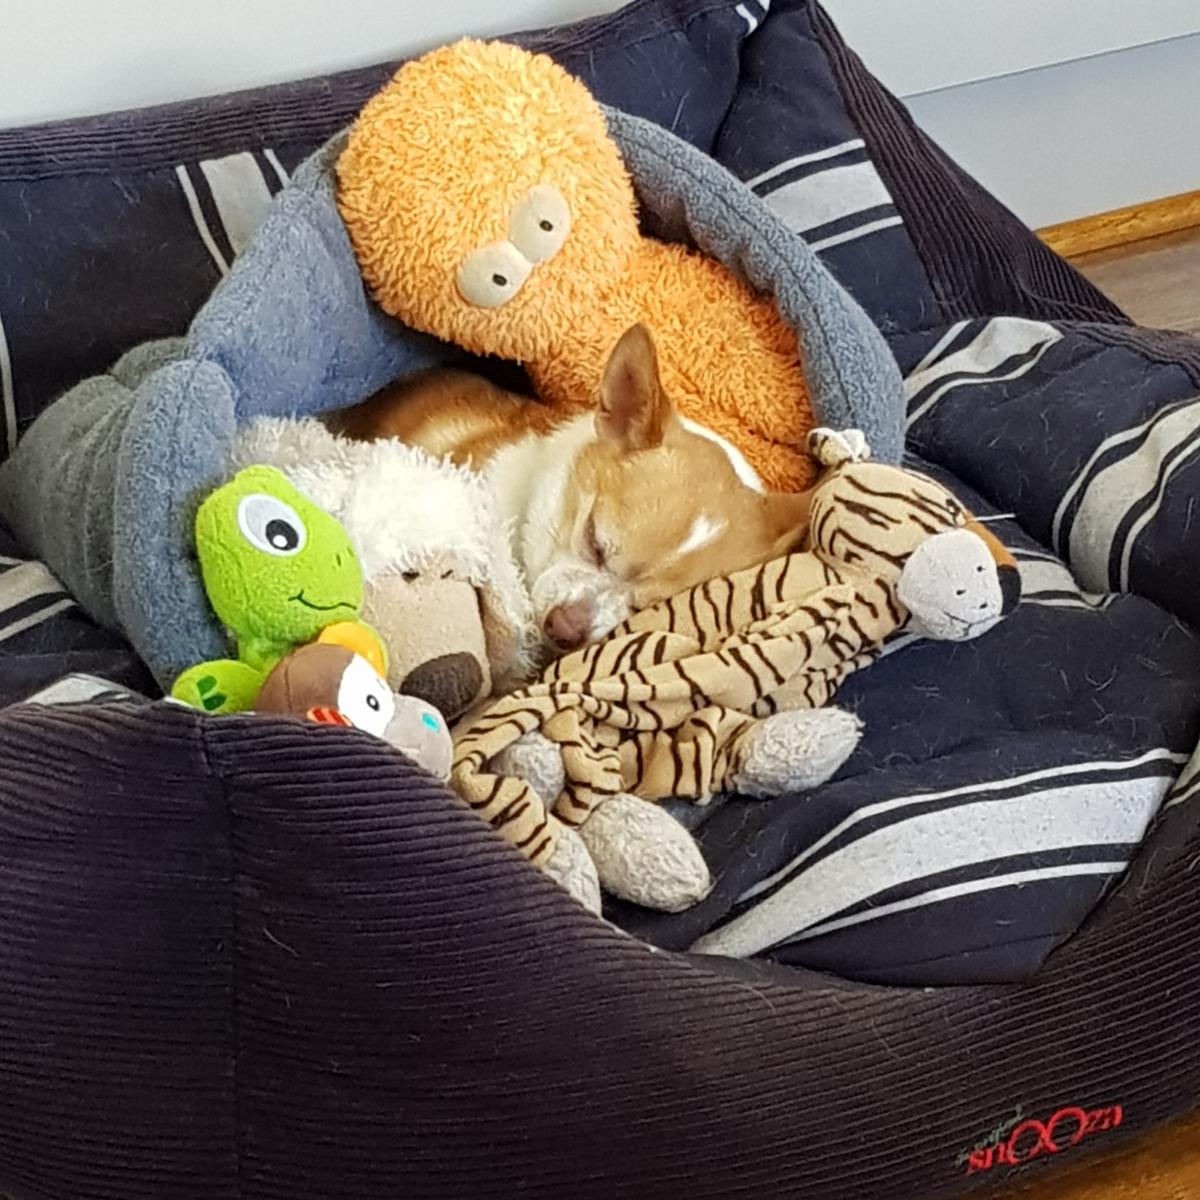 Jai surrounded by all his toys in the bed. (Sunday, 2nd of December 2018)